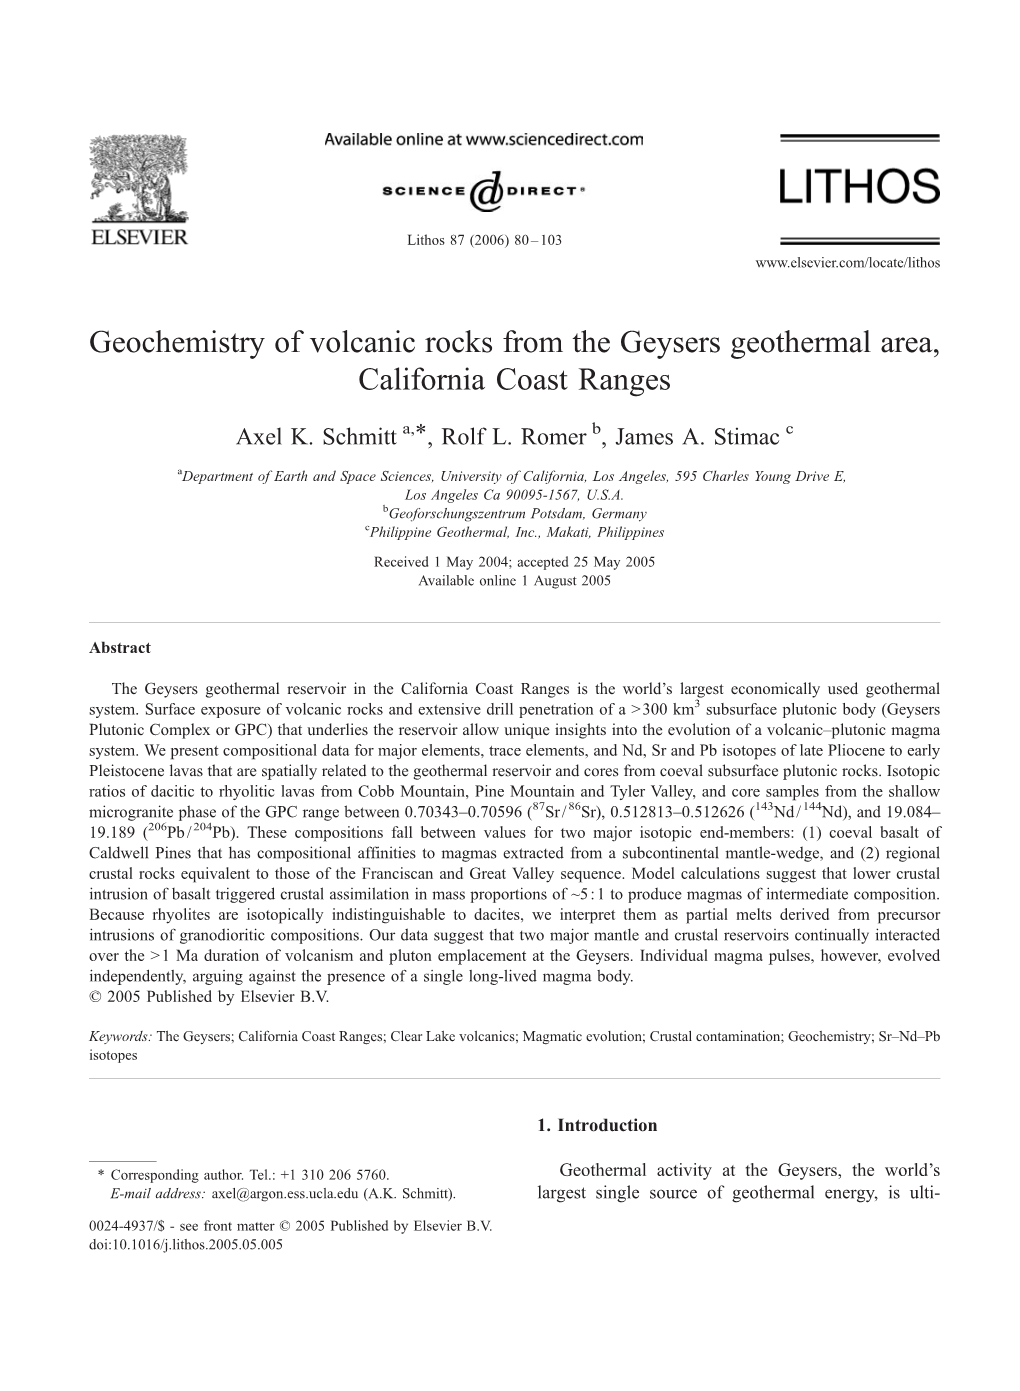 Geochemistry of Volcanic Rocks from the Geysers Geothermal Area, California Coast Ranges